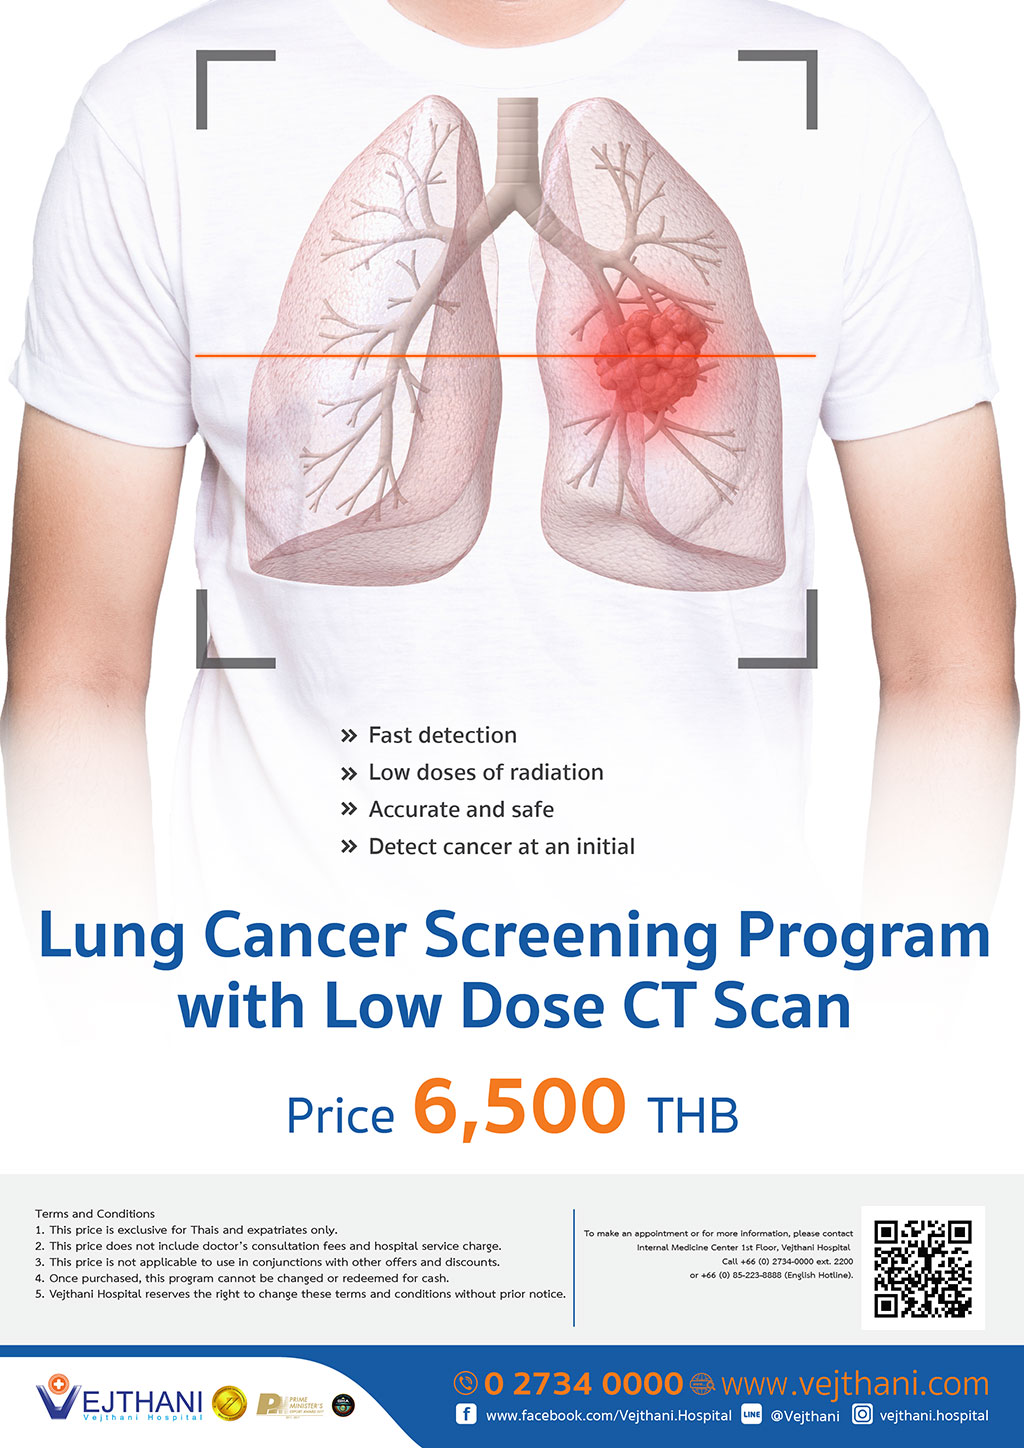 Lung Cancer Screening Program with Low Dose CT Scan - Vejthani Hospital | JCI Accredited International Hospital in